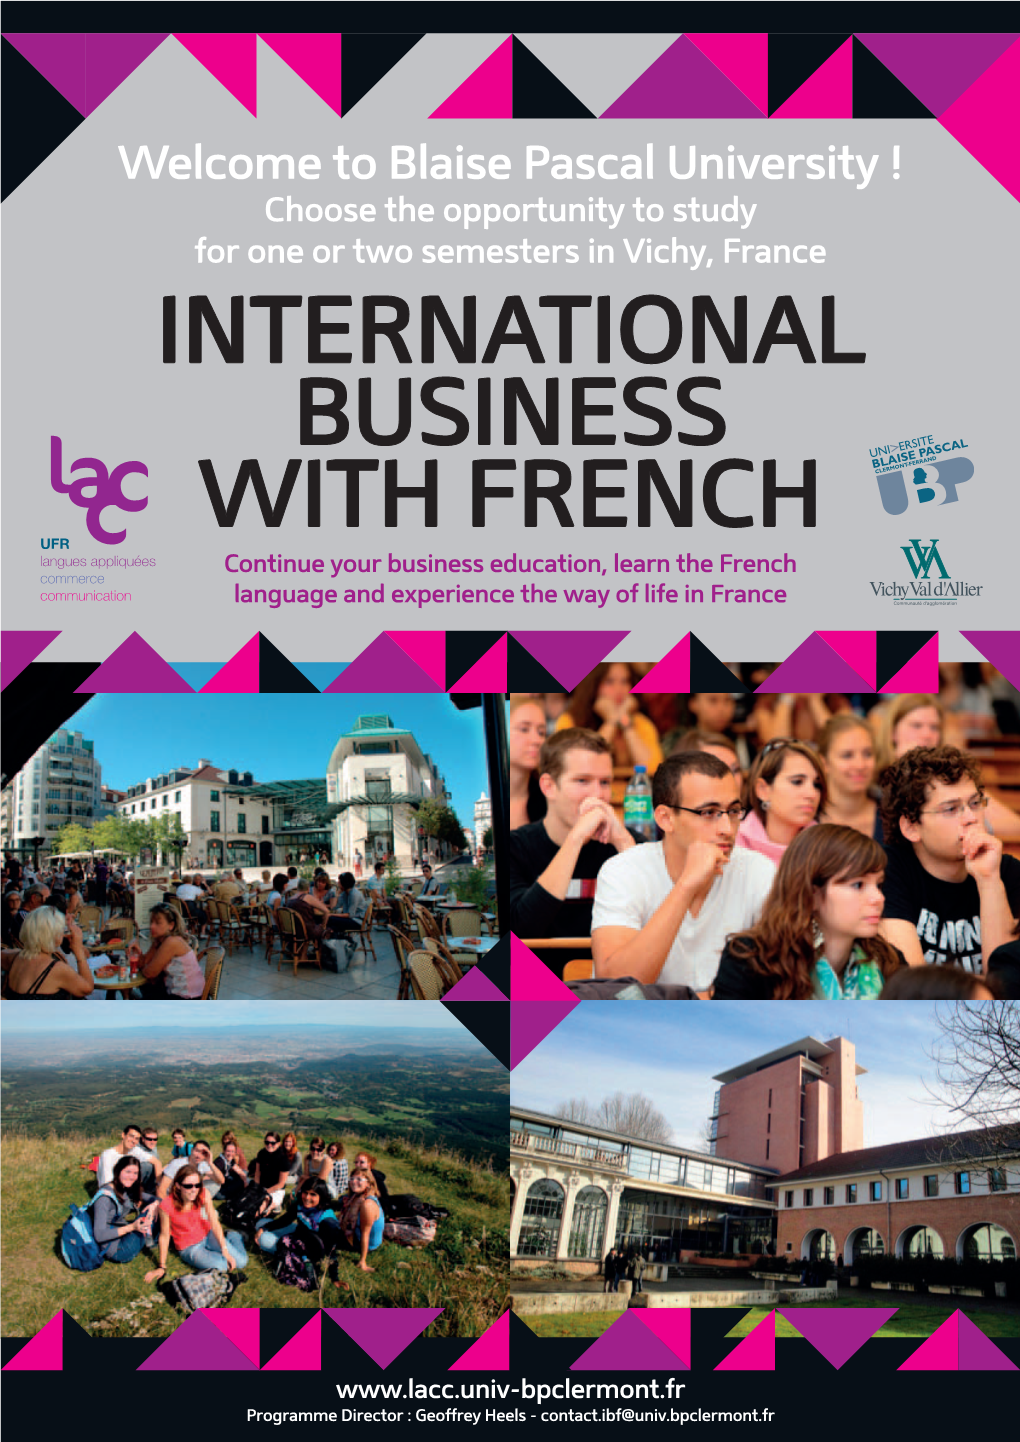 INTERNATIONAL BUSINESS with FRENCH Welcome to Blaise Pascal